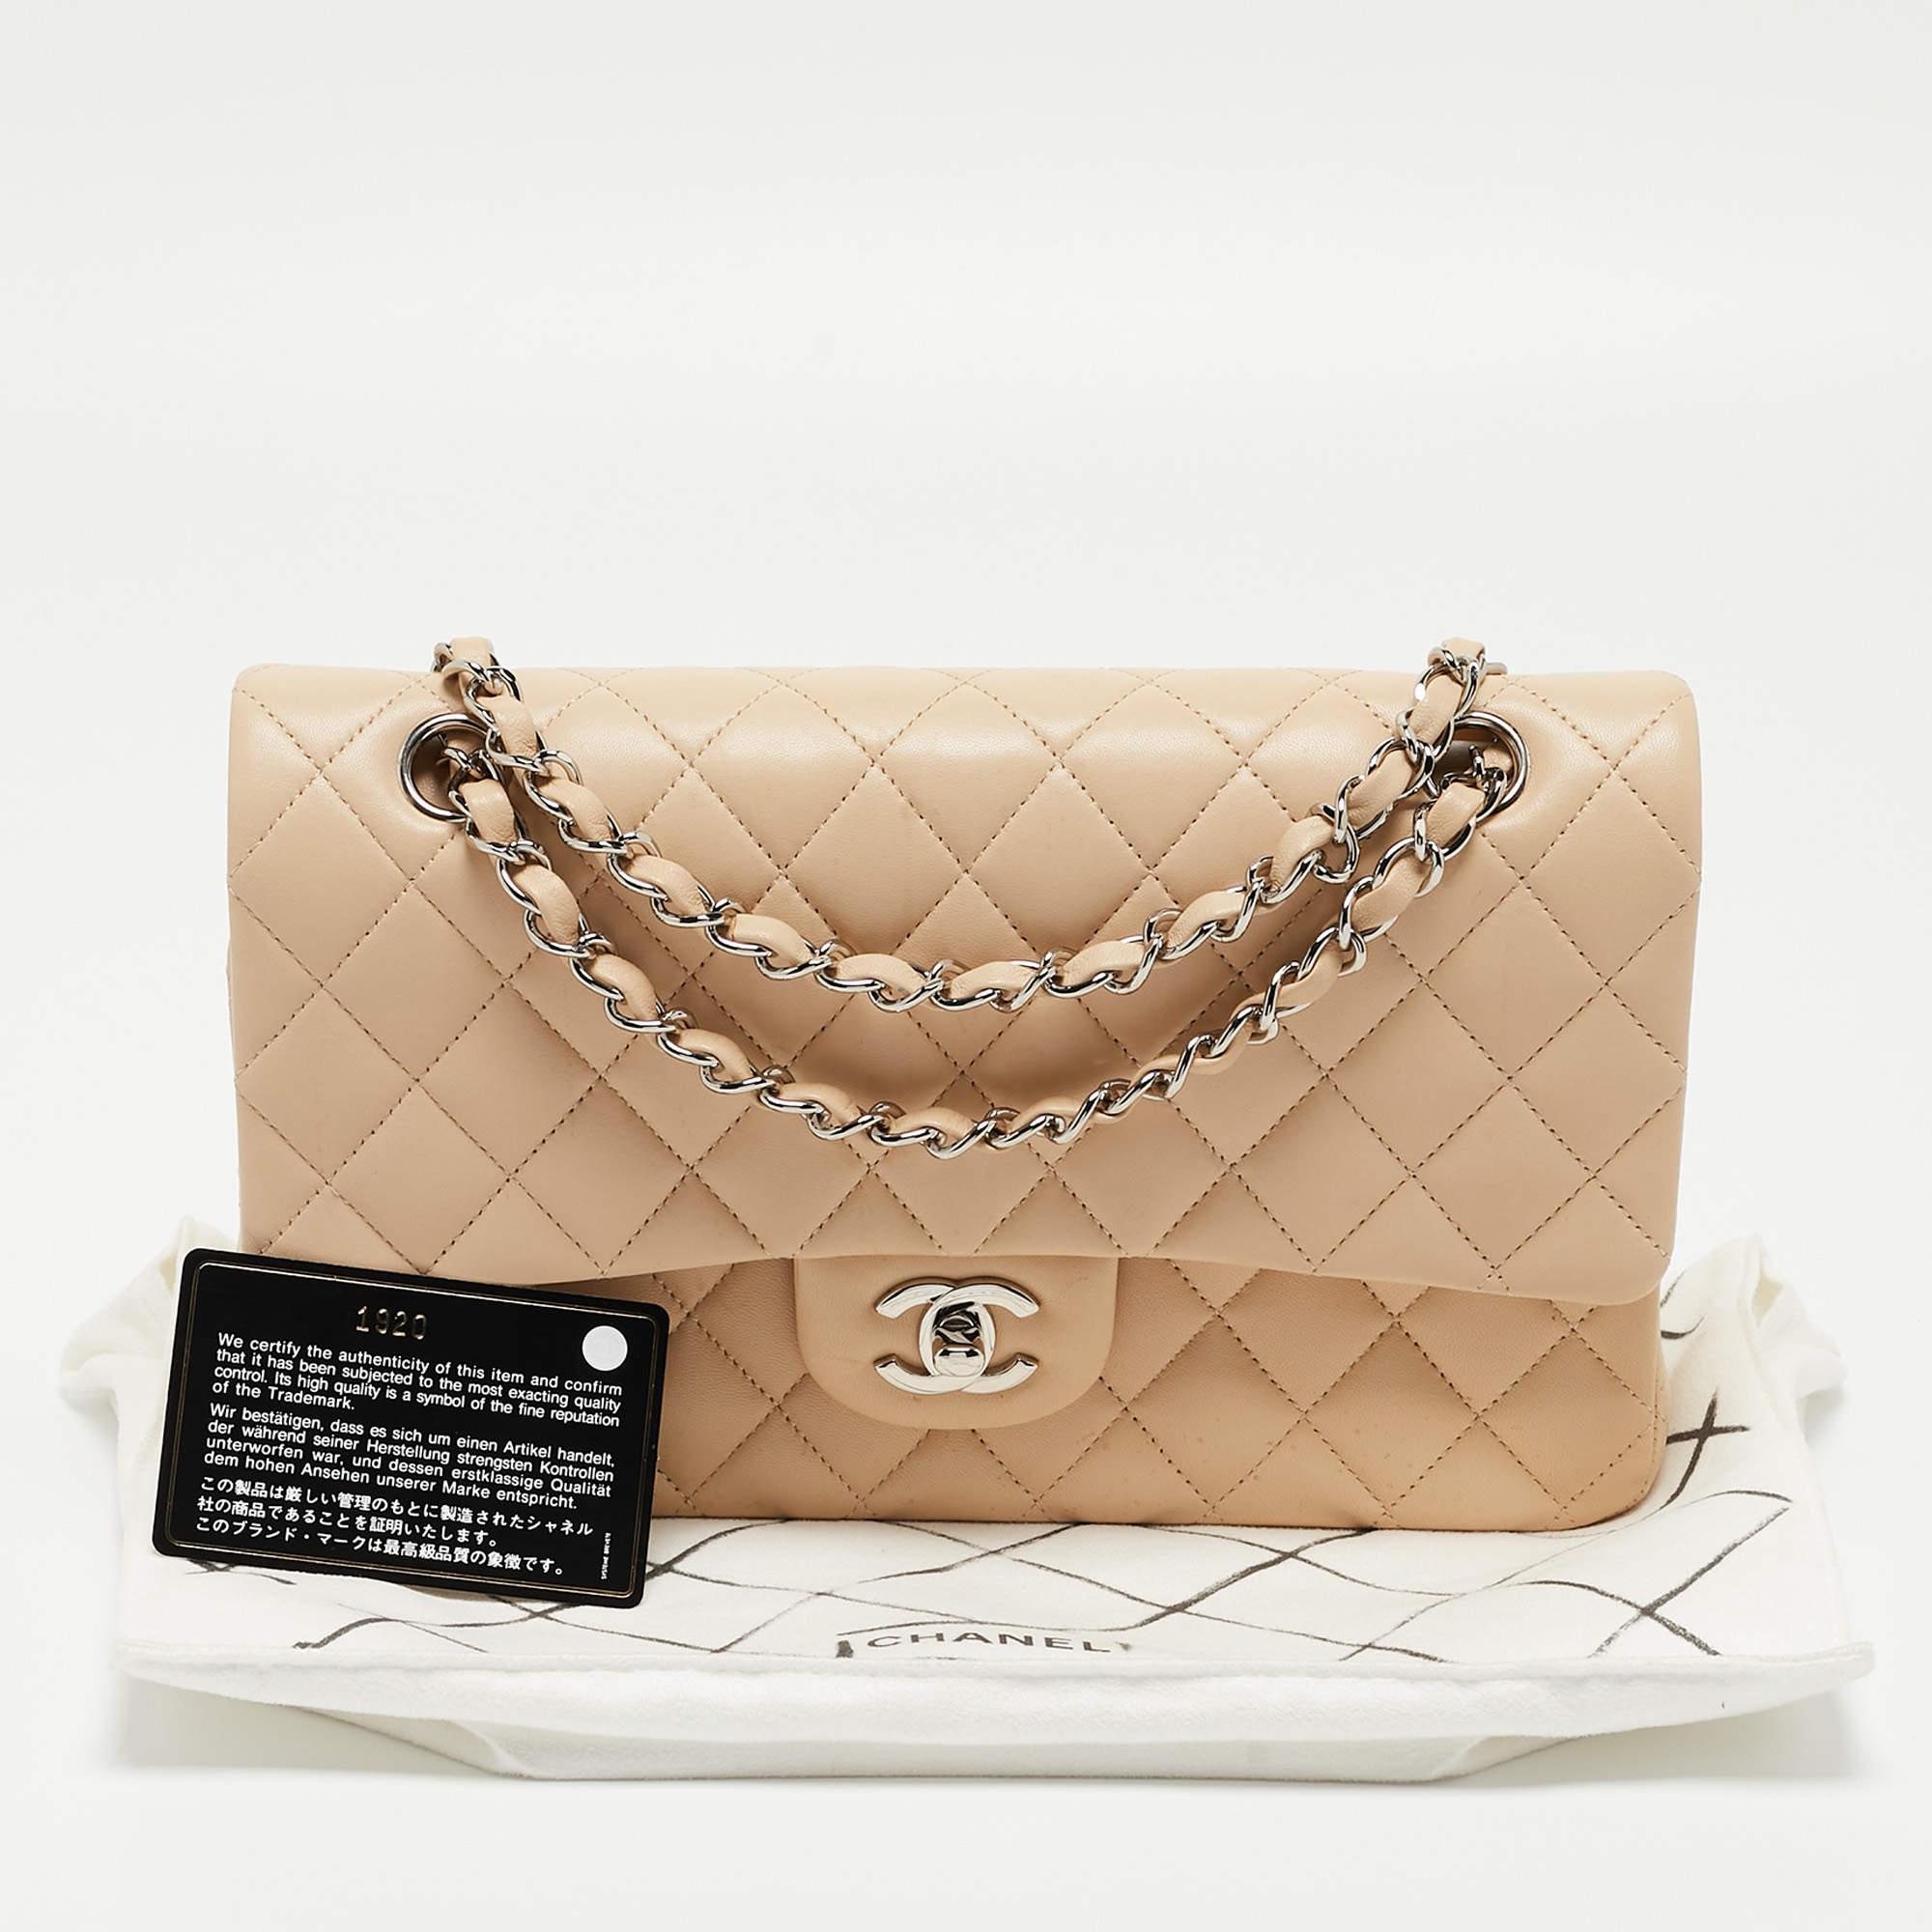 Chanel Beige Quilted Leather Medium Classic Double Flap Bag 15